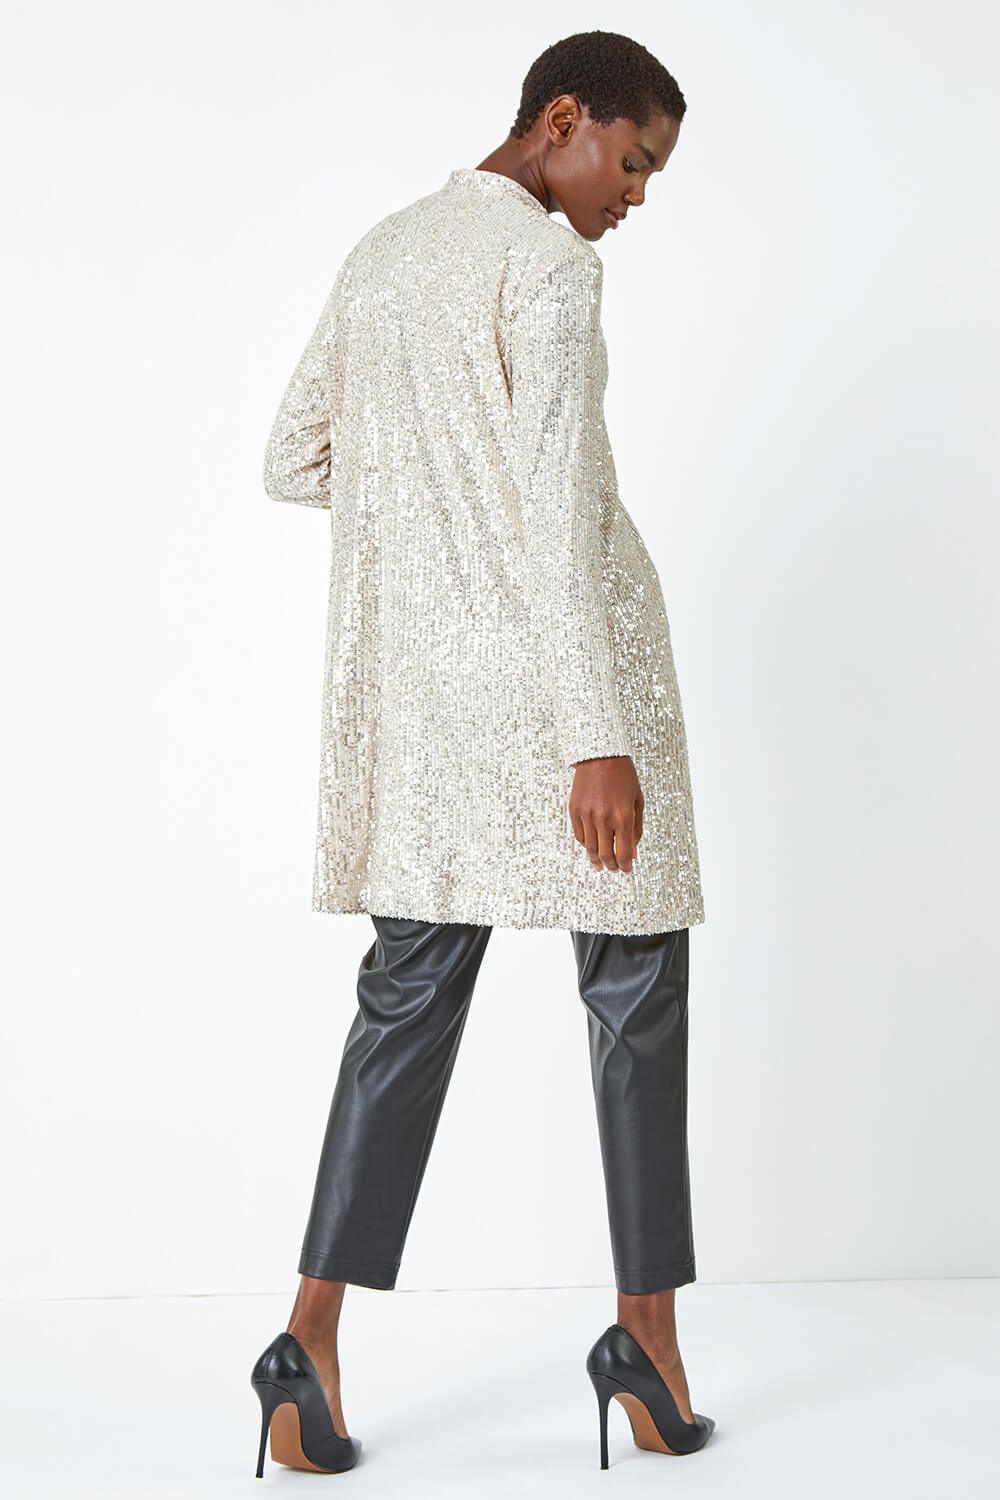 Silver Longline Sequin Stretch Jacket, Image 5 of 5